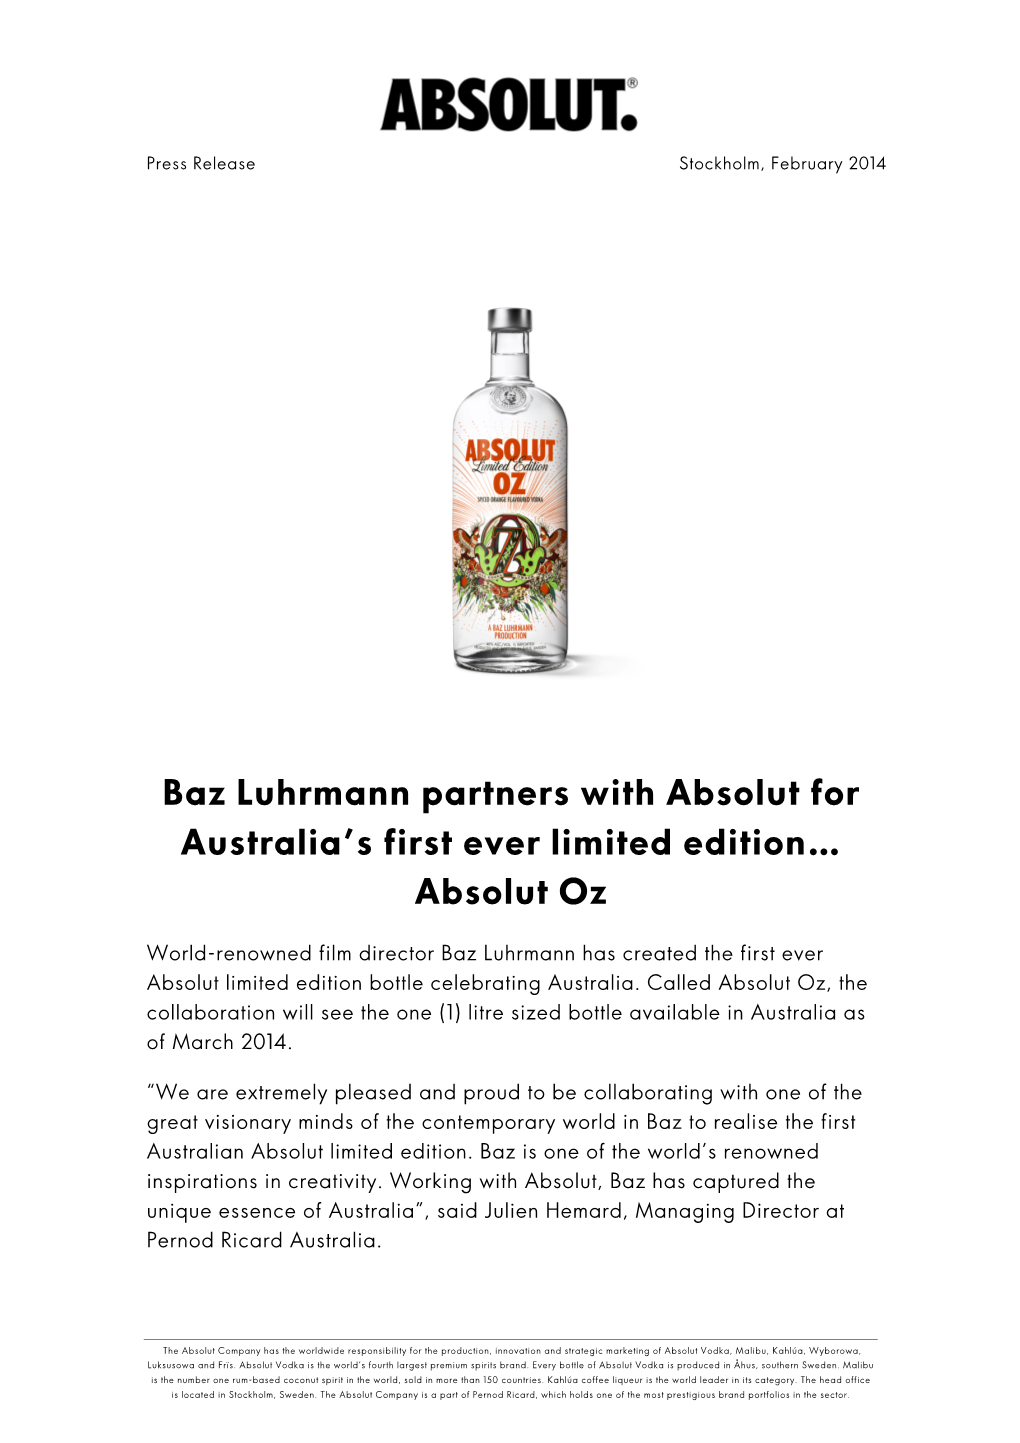 Baz Luhrmann Partners with Absolut for Australia's First